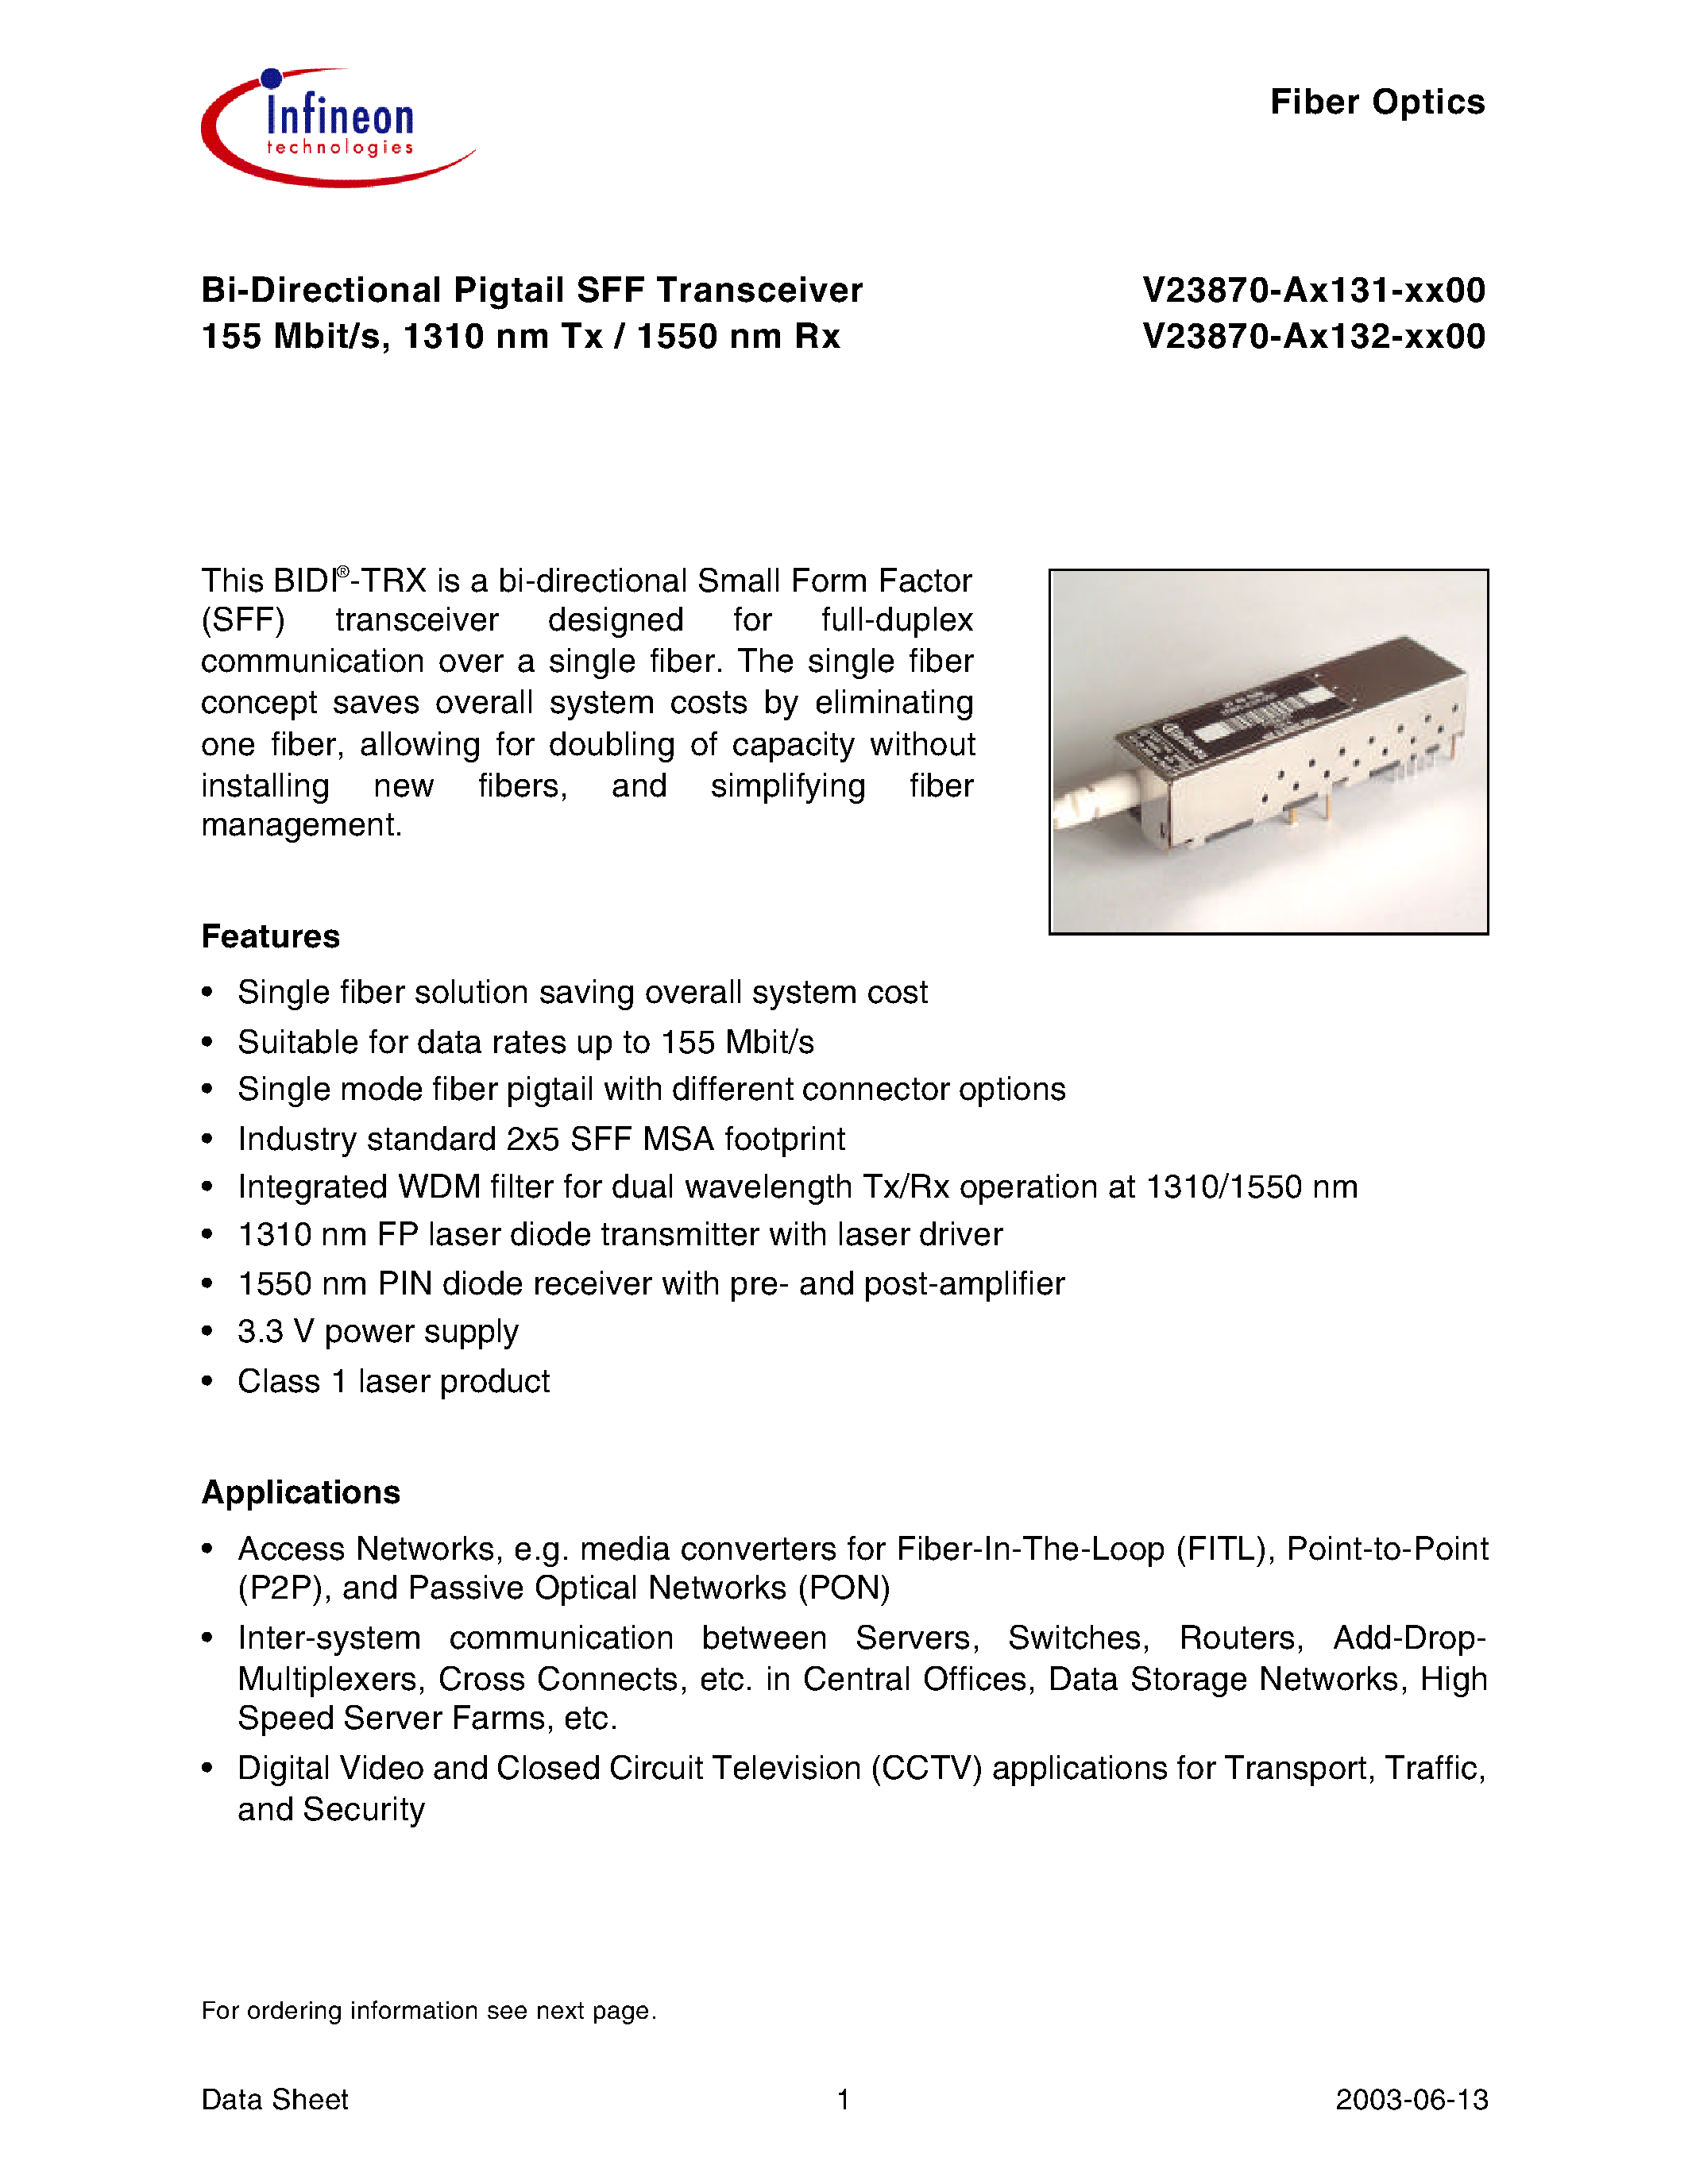 Datasheet V23870-A3131-H100 - Bi-Directional Pigtail SFF Transceiver 155 Mbit/s/ 1310 nm Tx / 1550 nm Rx page 1